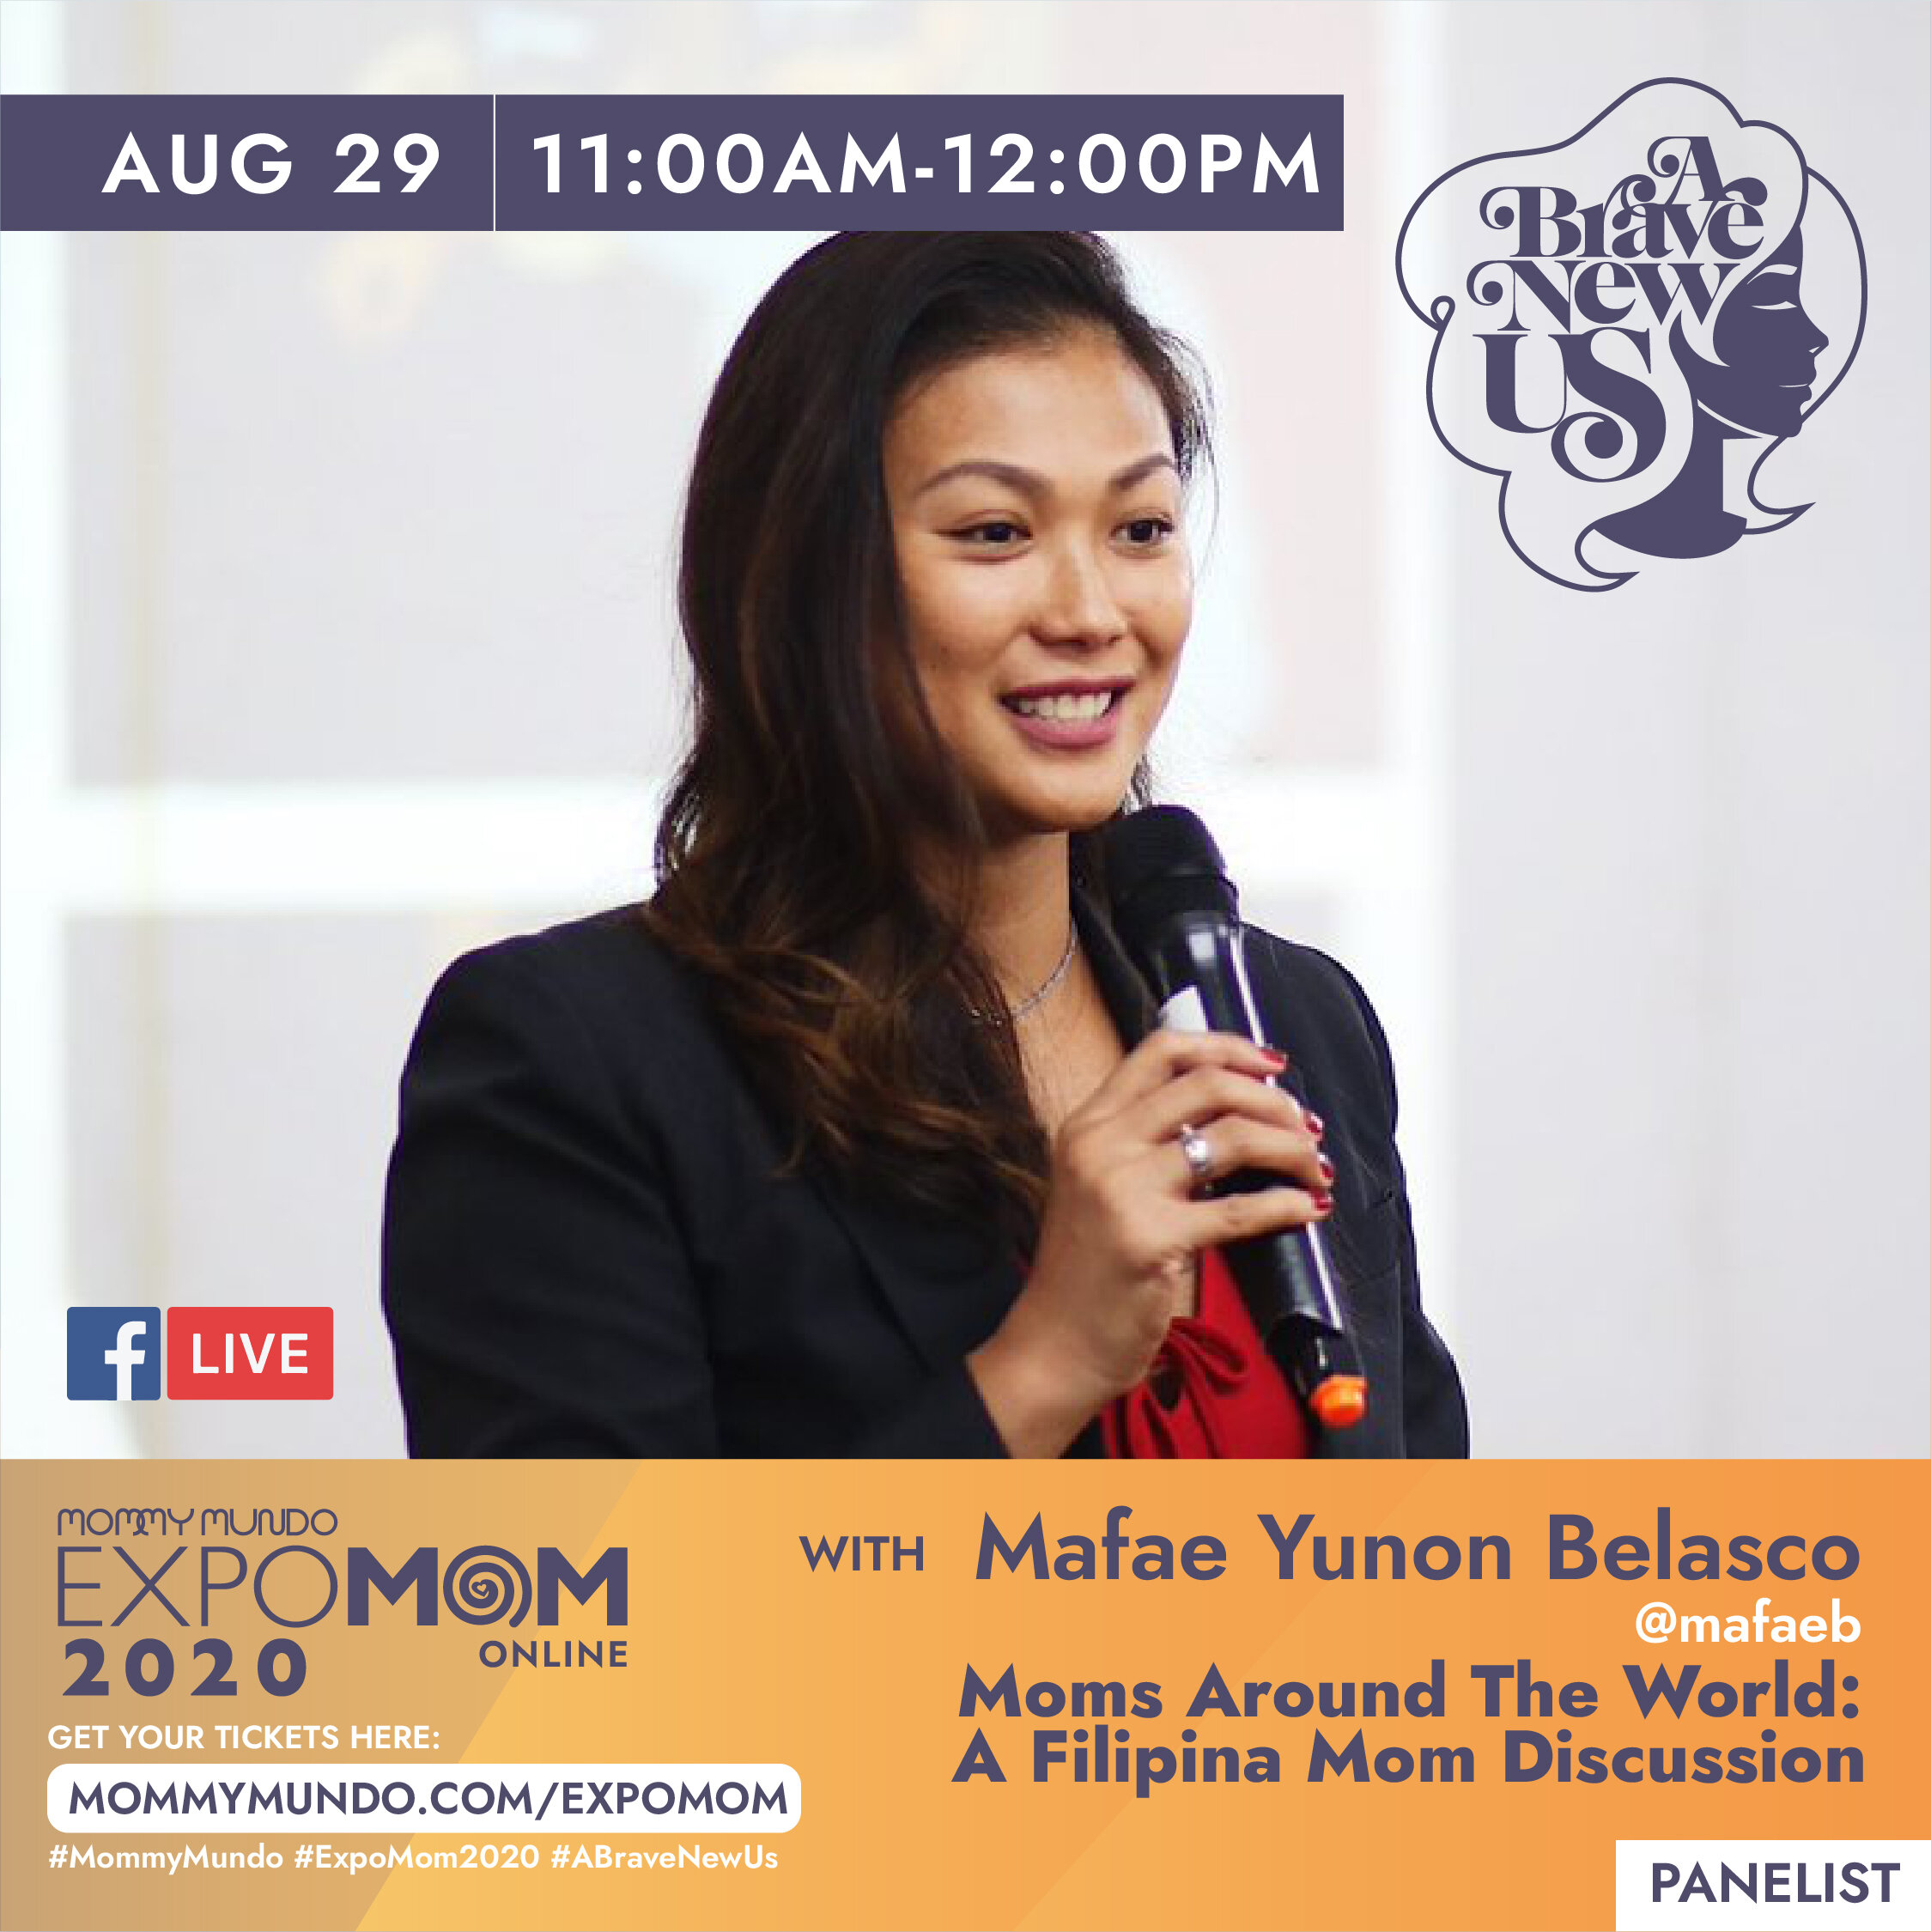  A mother of six, wife, model, Beauty Queen, pageant expert, motivational speaker, personality development coach, business woman, and blogger, this former Miss Philippines Australia and Miss Philippines World lives by the motto Time + Productivity = 